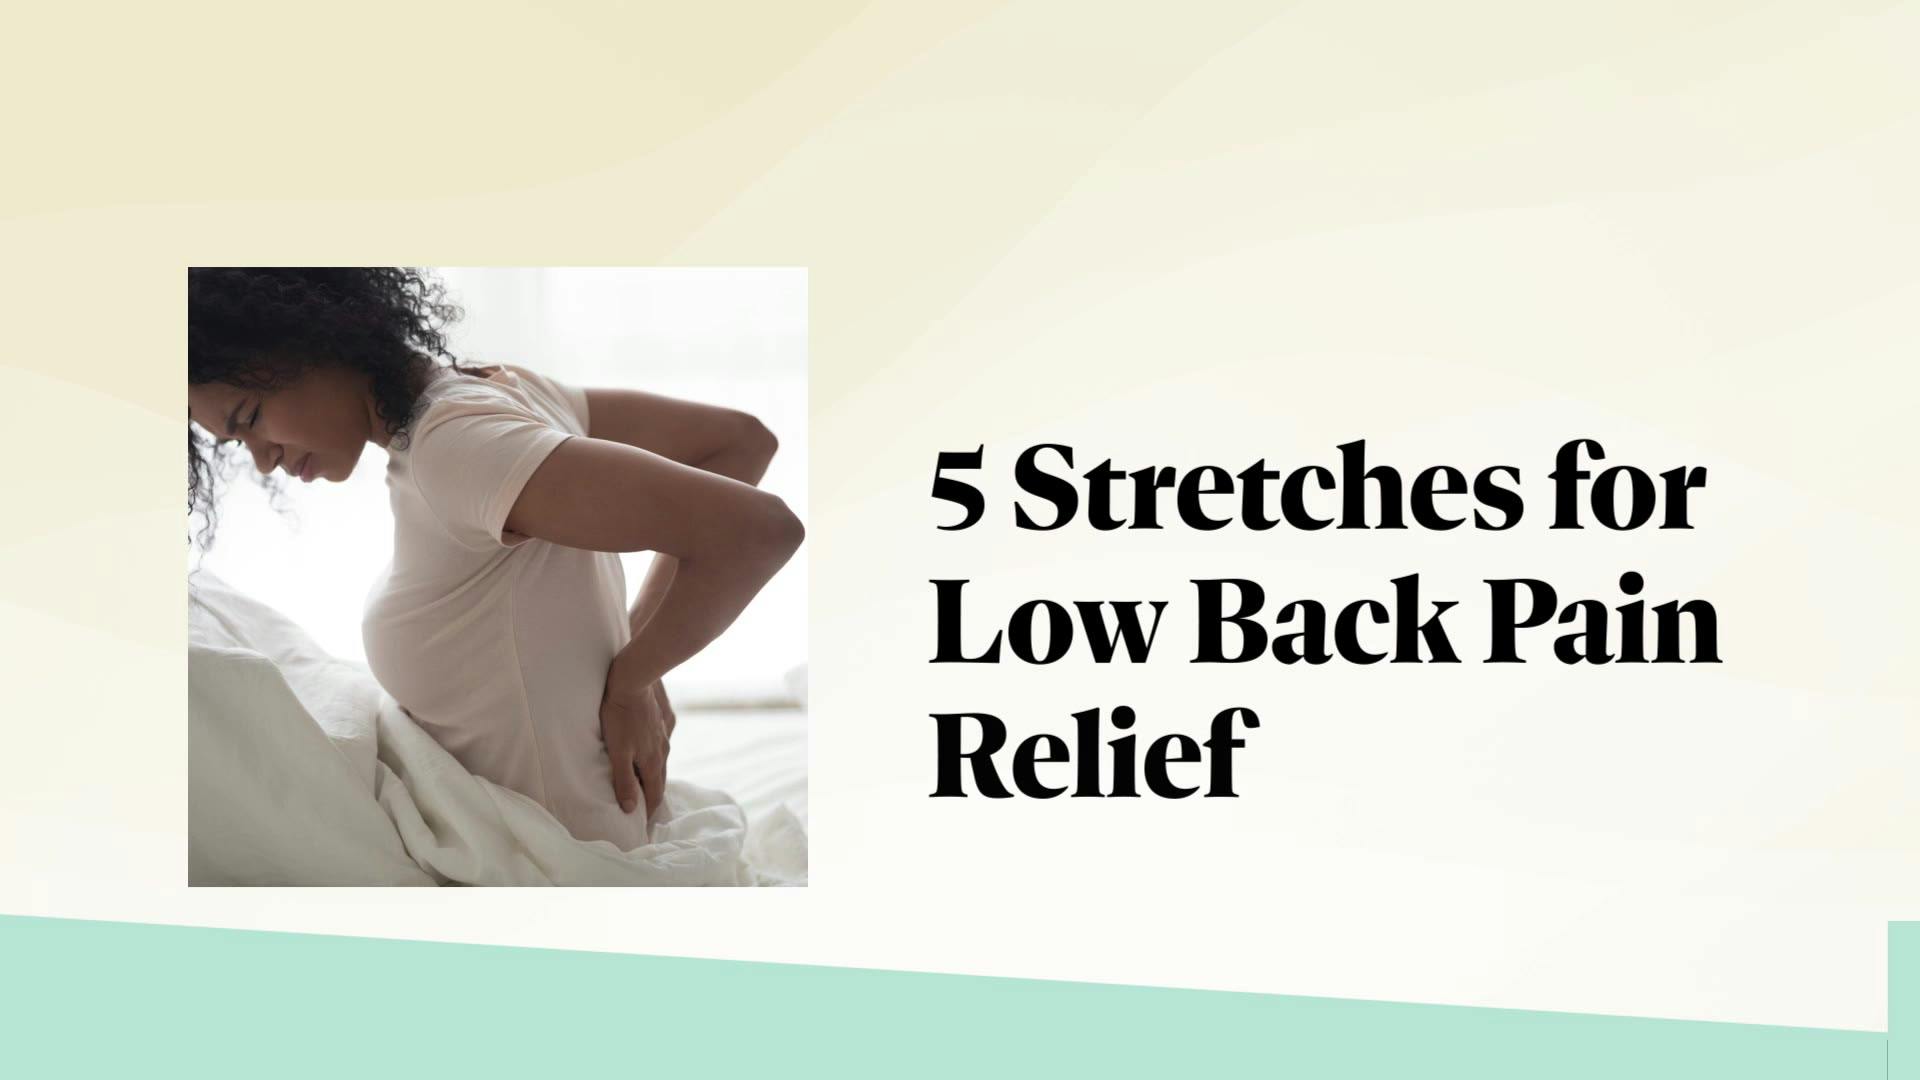 YJ-21 | Stretches for Low Back Pain Relief